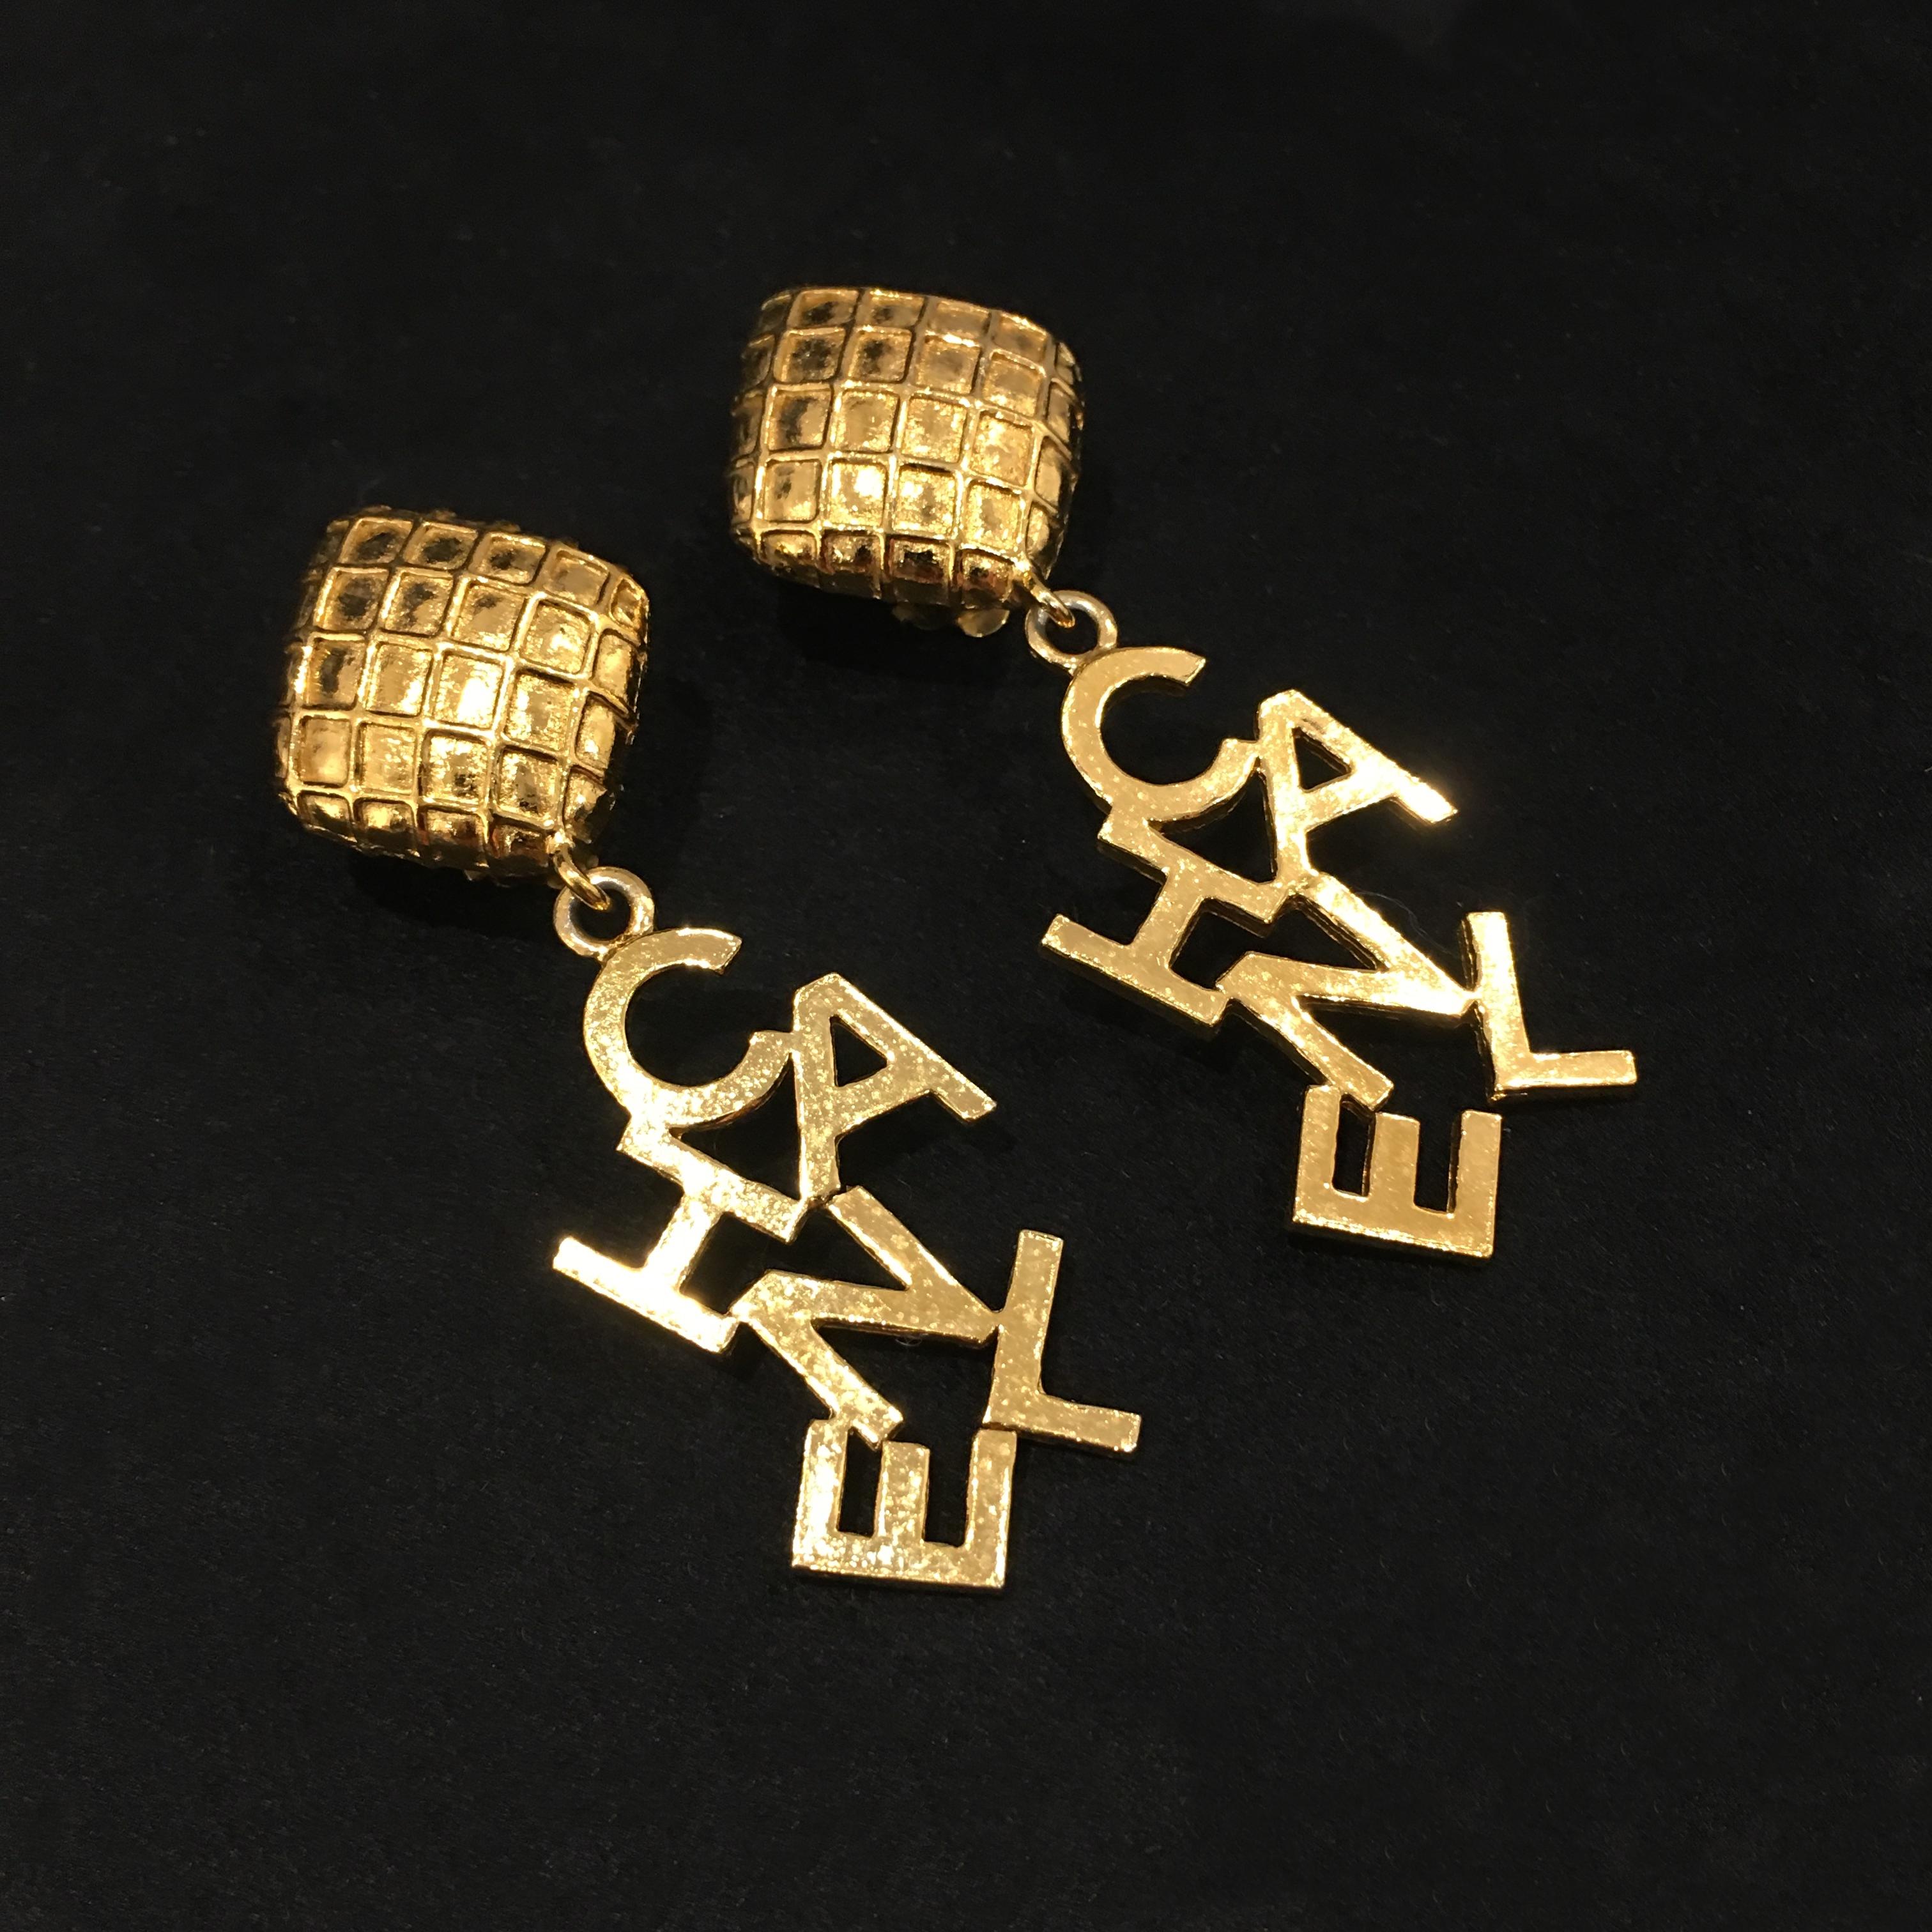 Brand: Chanel
Reference: JW363
Measurement of Earrings: 2.3cm x 6.5cm
Material: Gilt Metal
Year: 1980’s
Made in France

Please Note: the jewelries are guarantee 100% authentic pre-owned therefore might have signs of tarnish or oxidation , please